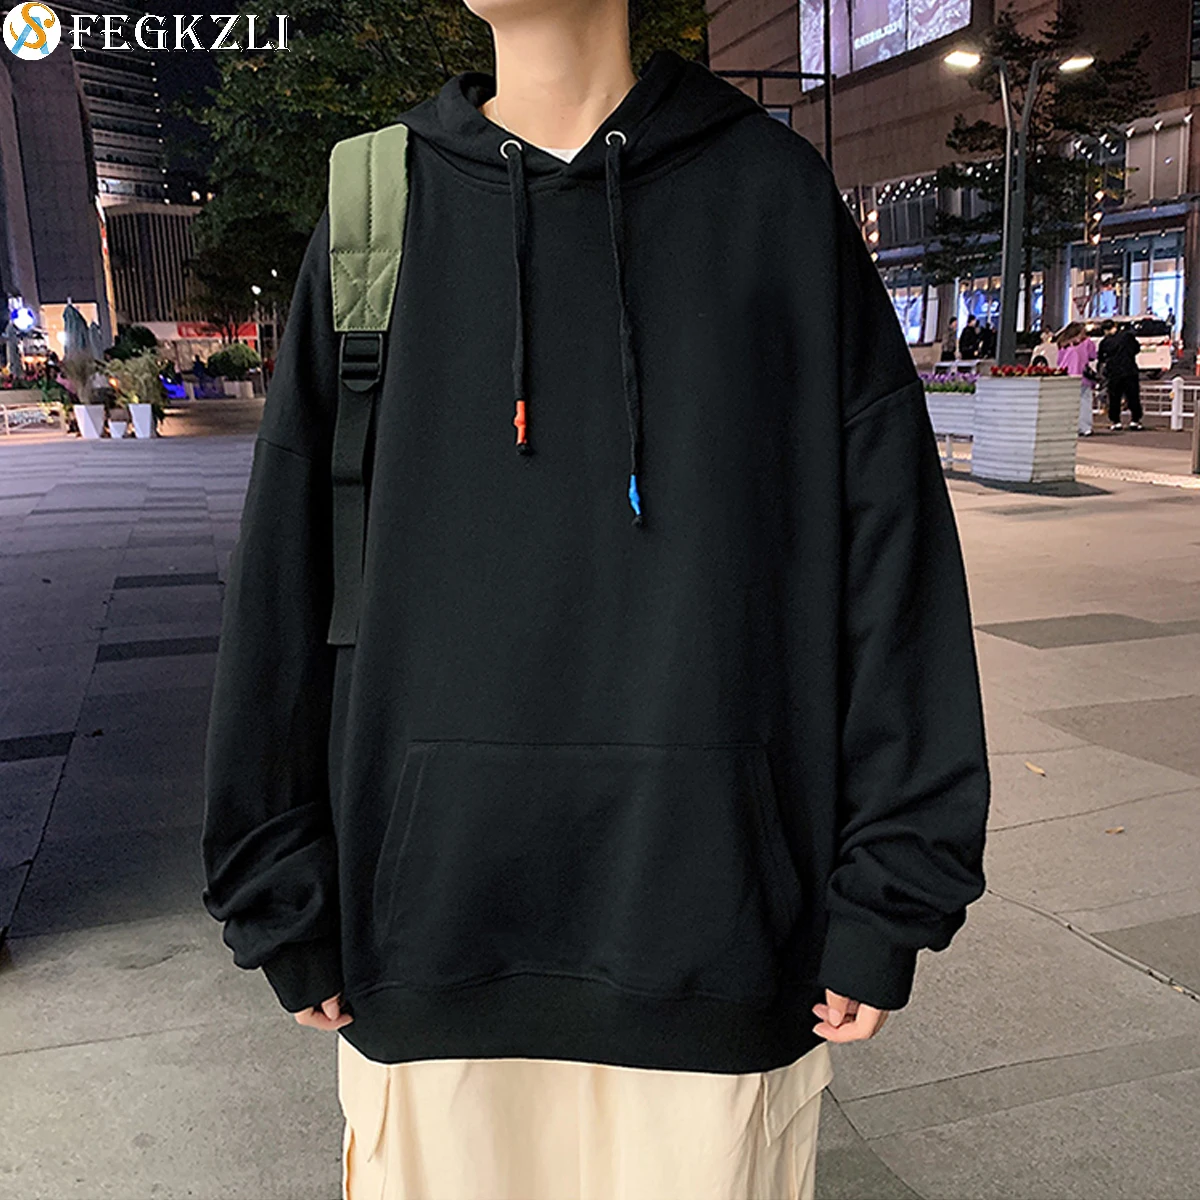 

FEGKZLI Asian Streetwear Casual Hoodies Men or Women Daily Hooded Solid Colors Loose Long Sleeve Pullovers Tops Black Couples